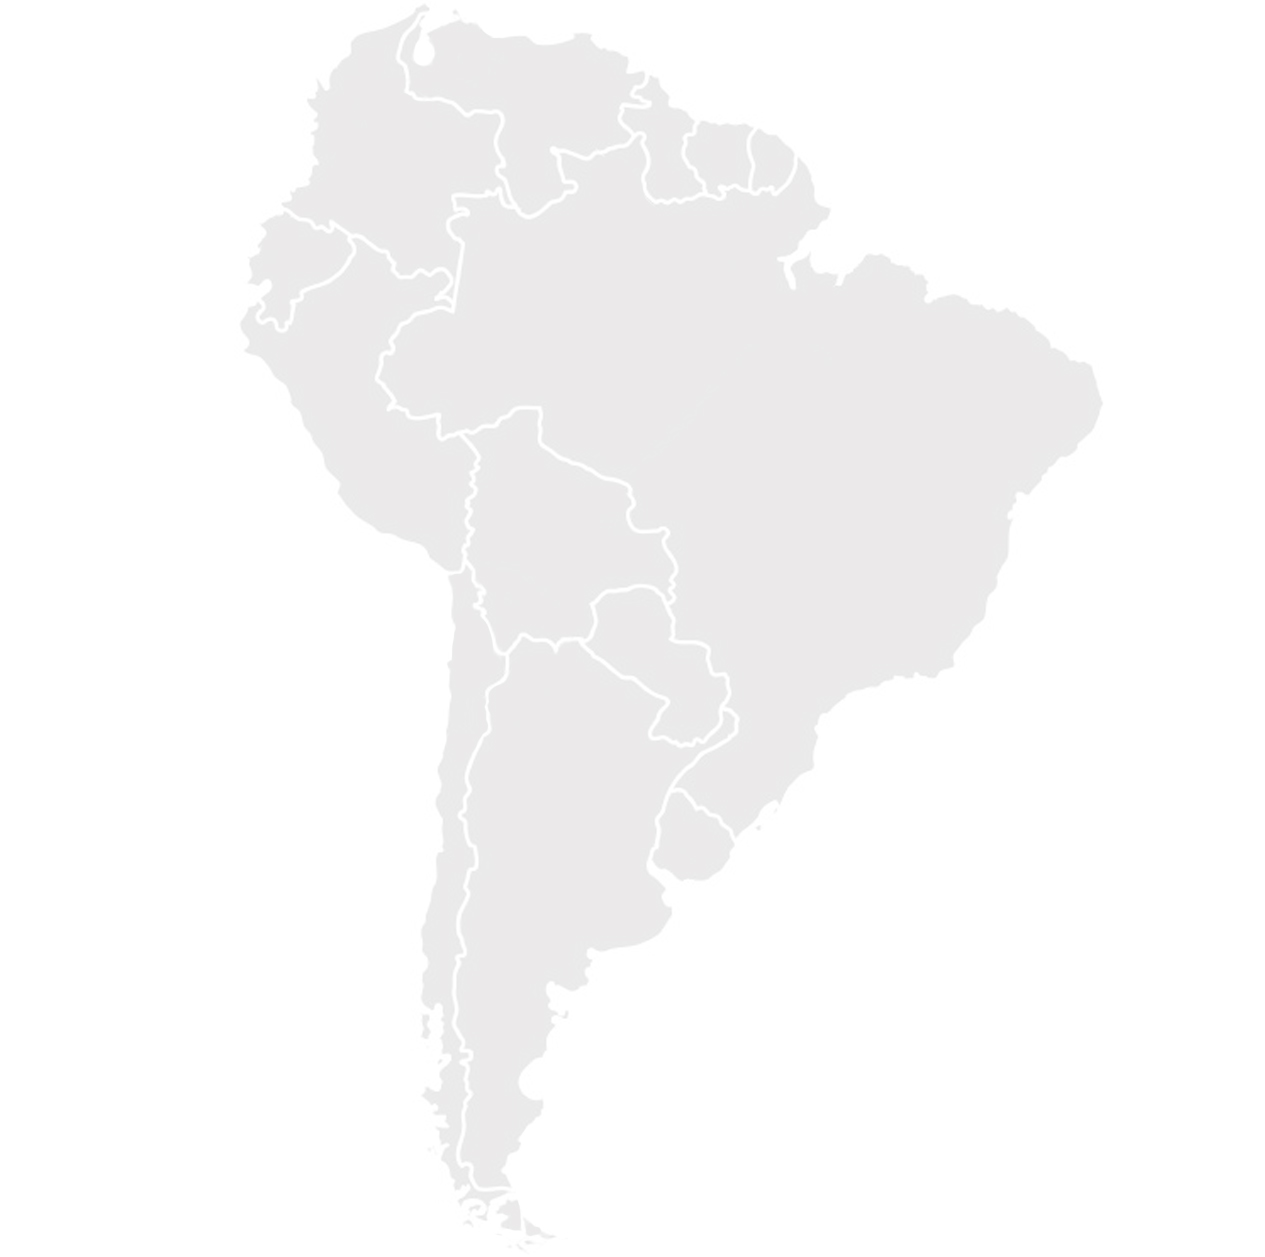 Gray map of South America